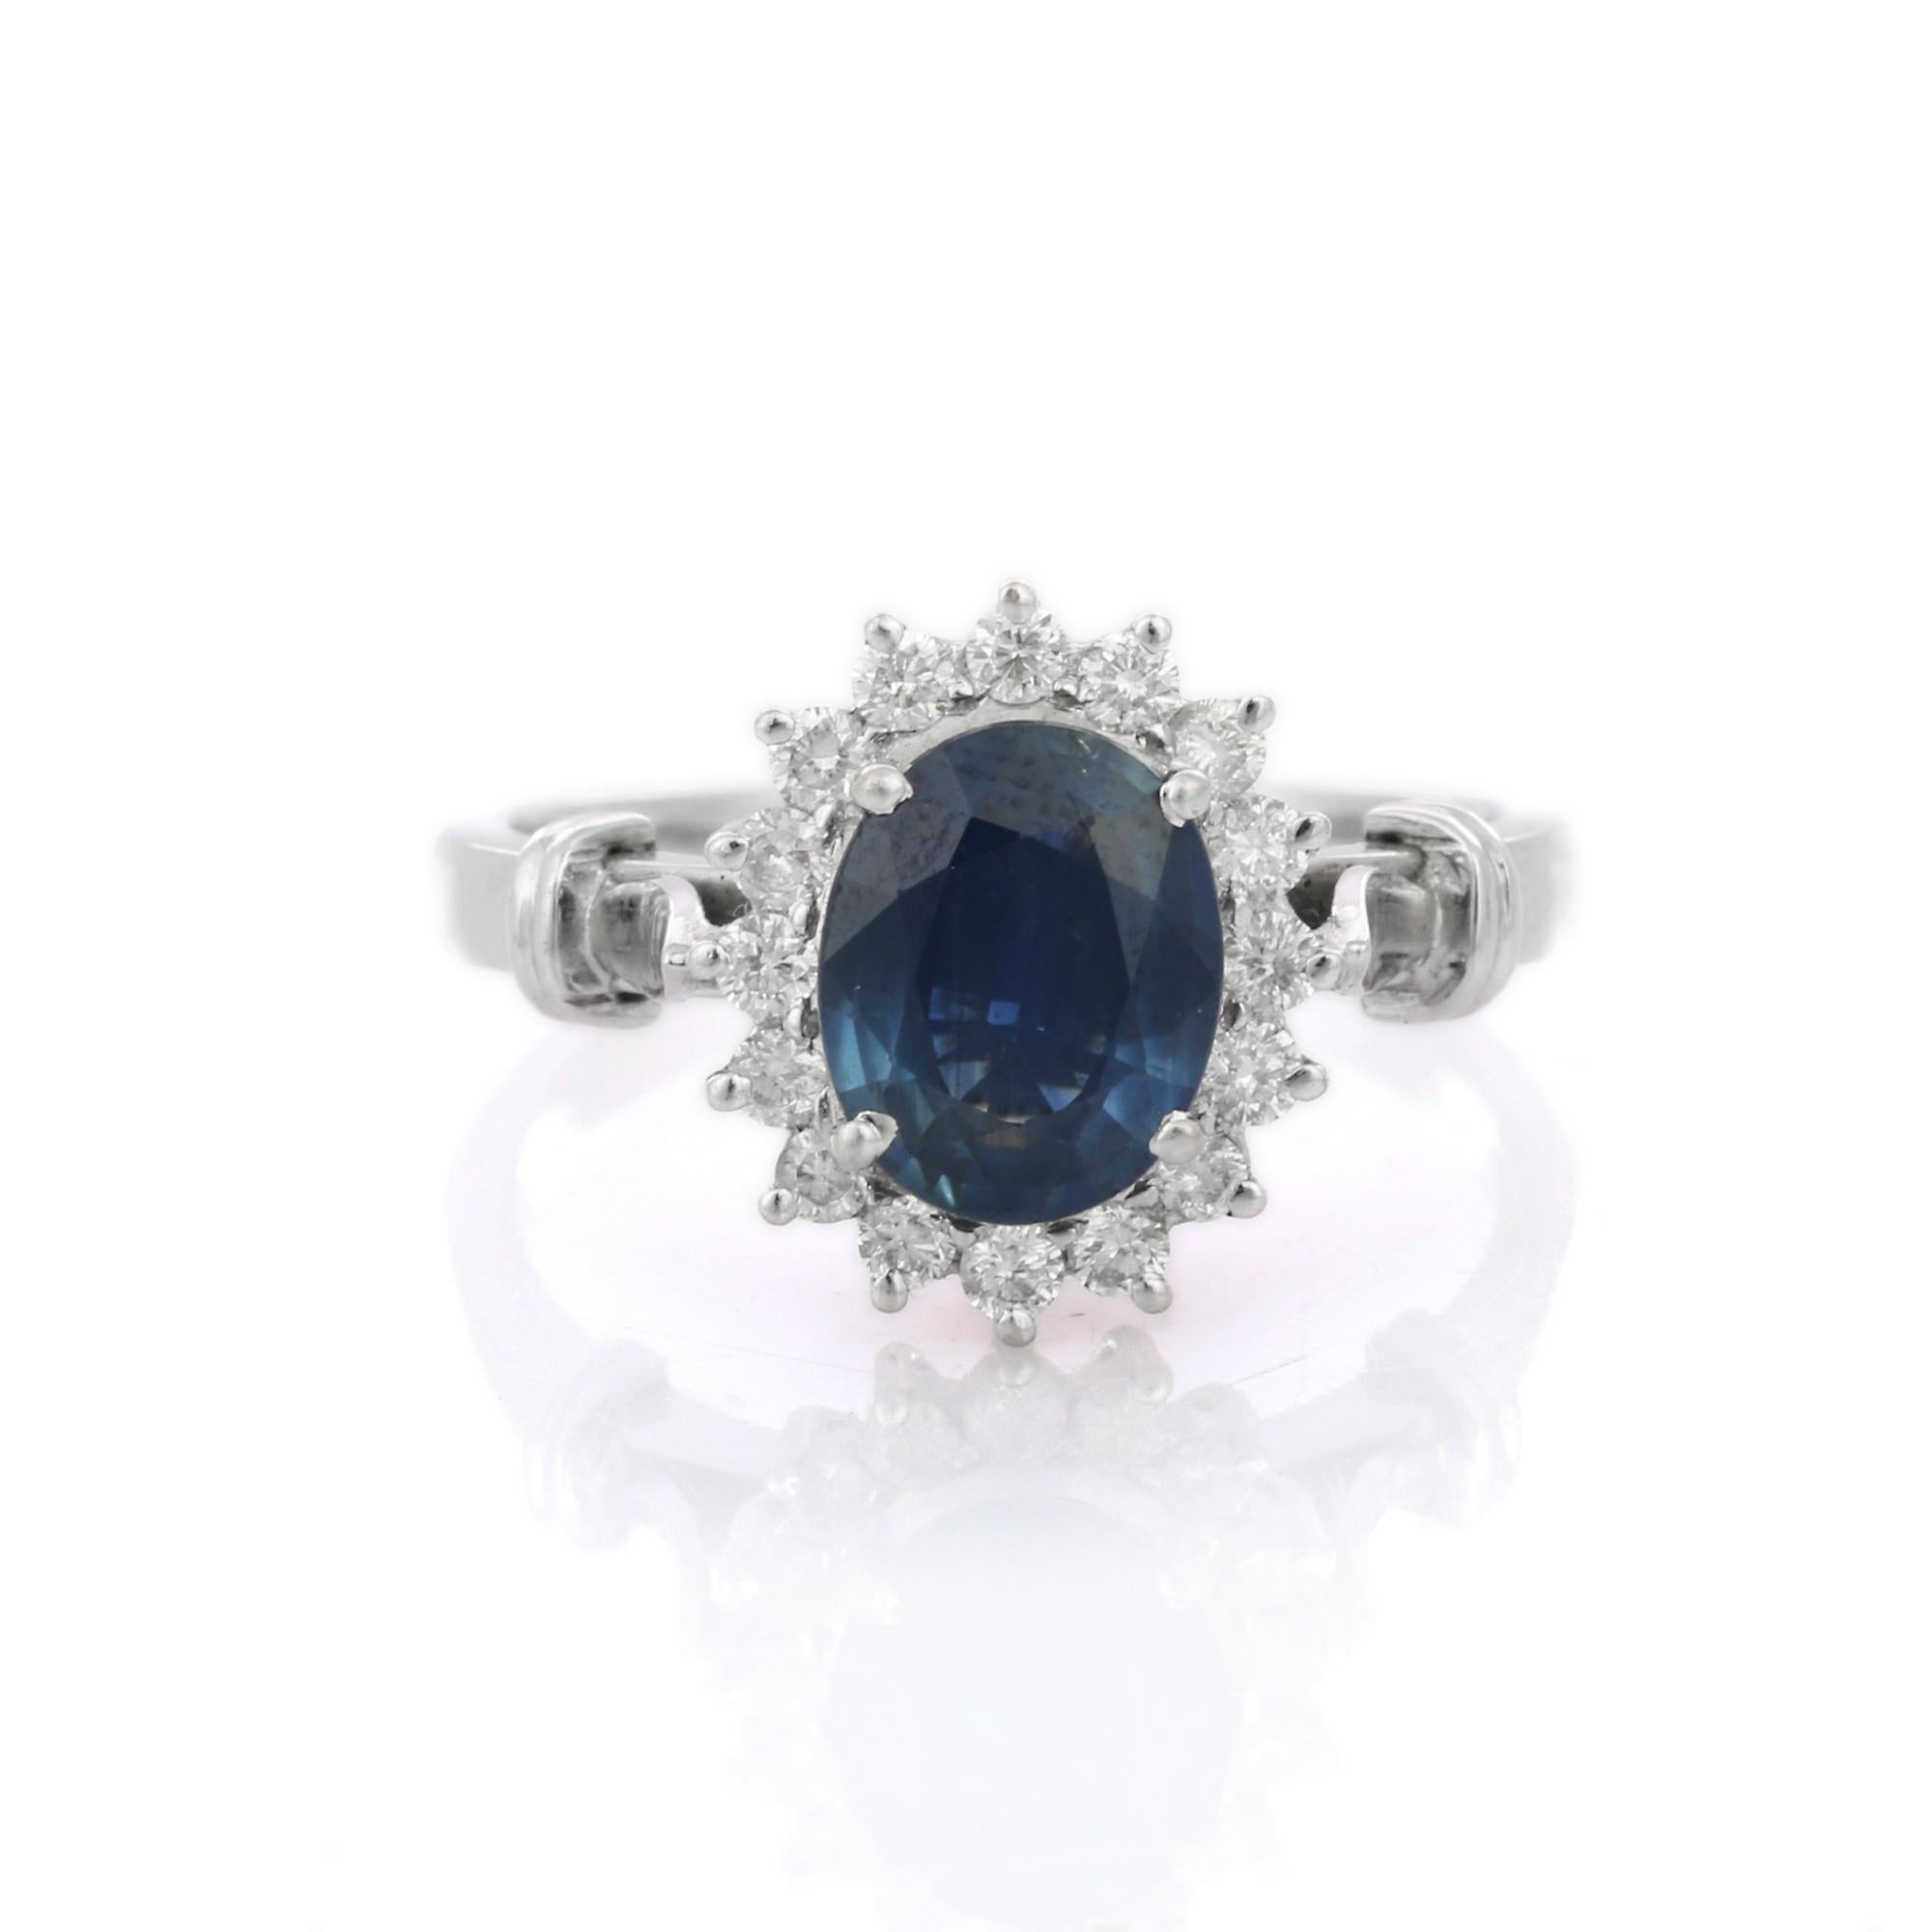 For Sale:  Royal Deep Blue Sapphire Betwixt Diamond Engagement Ring in 18K White Gold 5